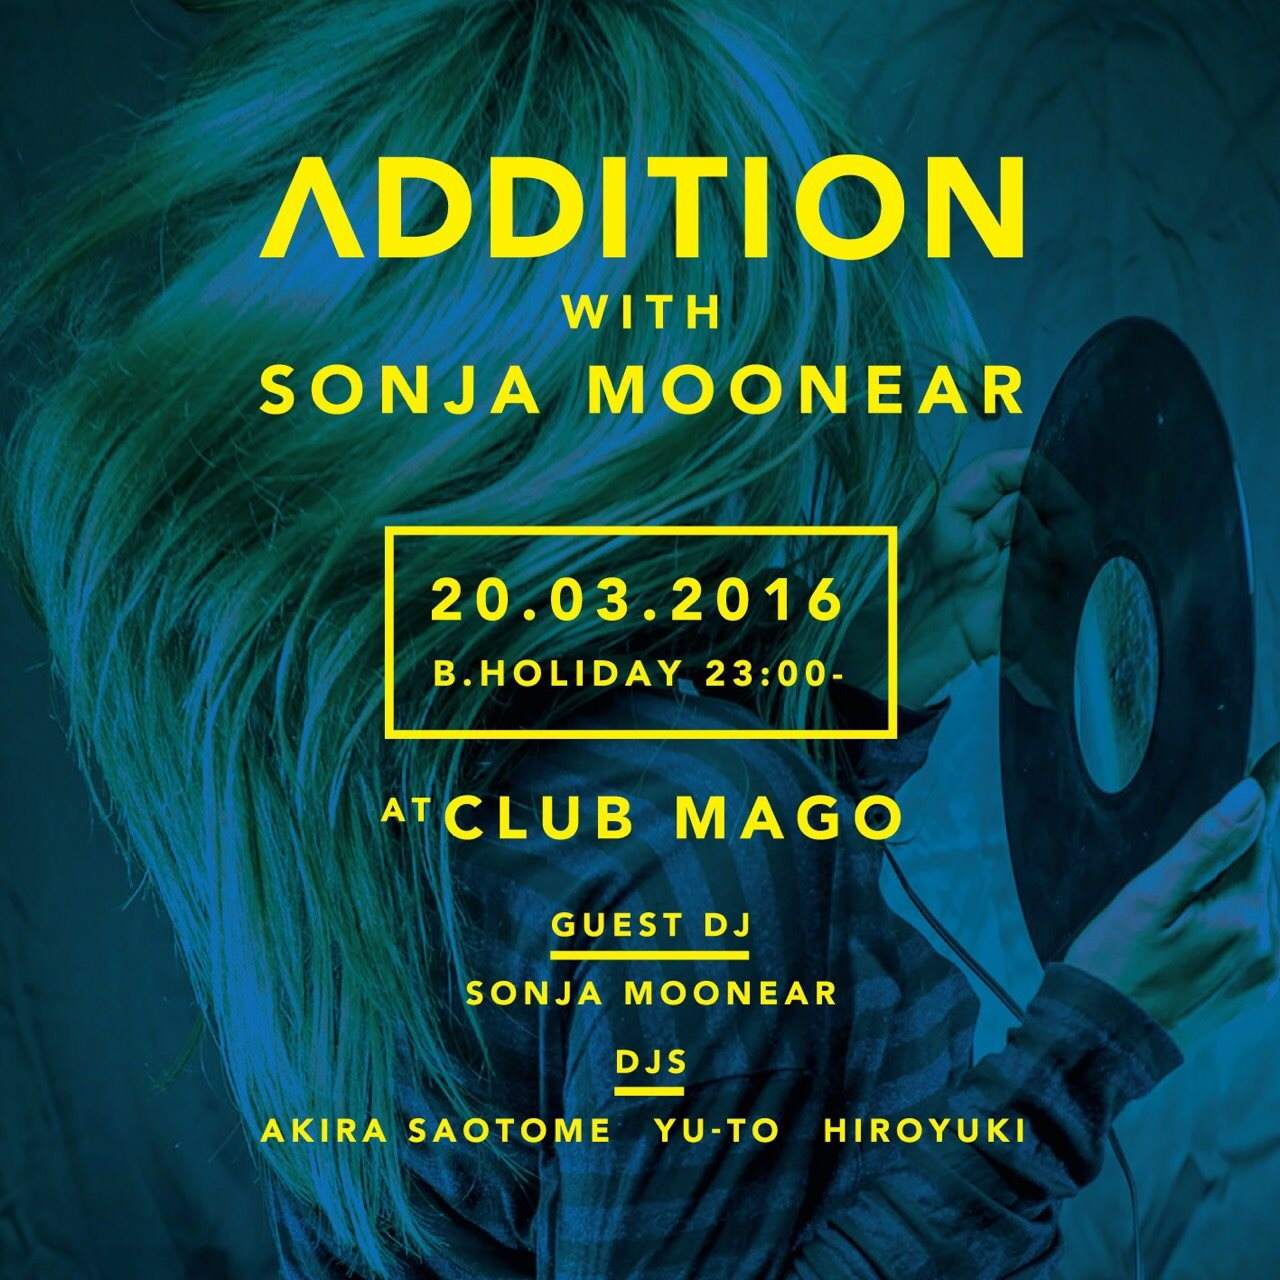 Addition with Sonja Moonear - フライヤー表